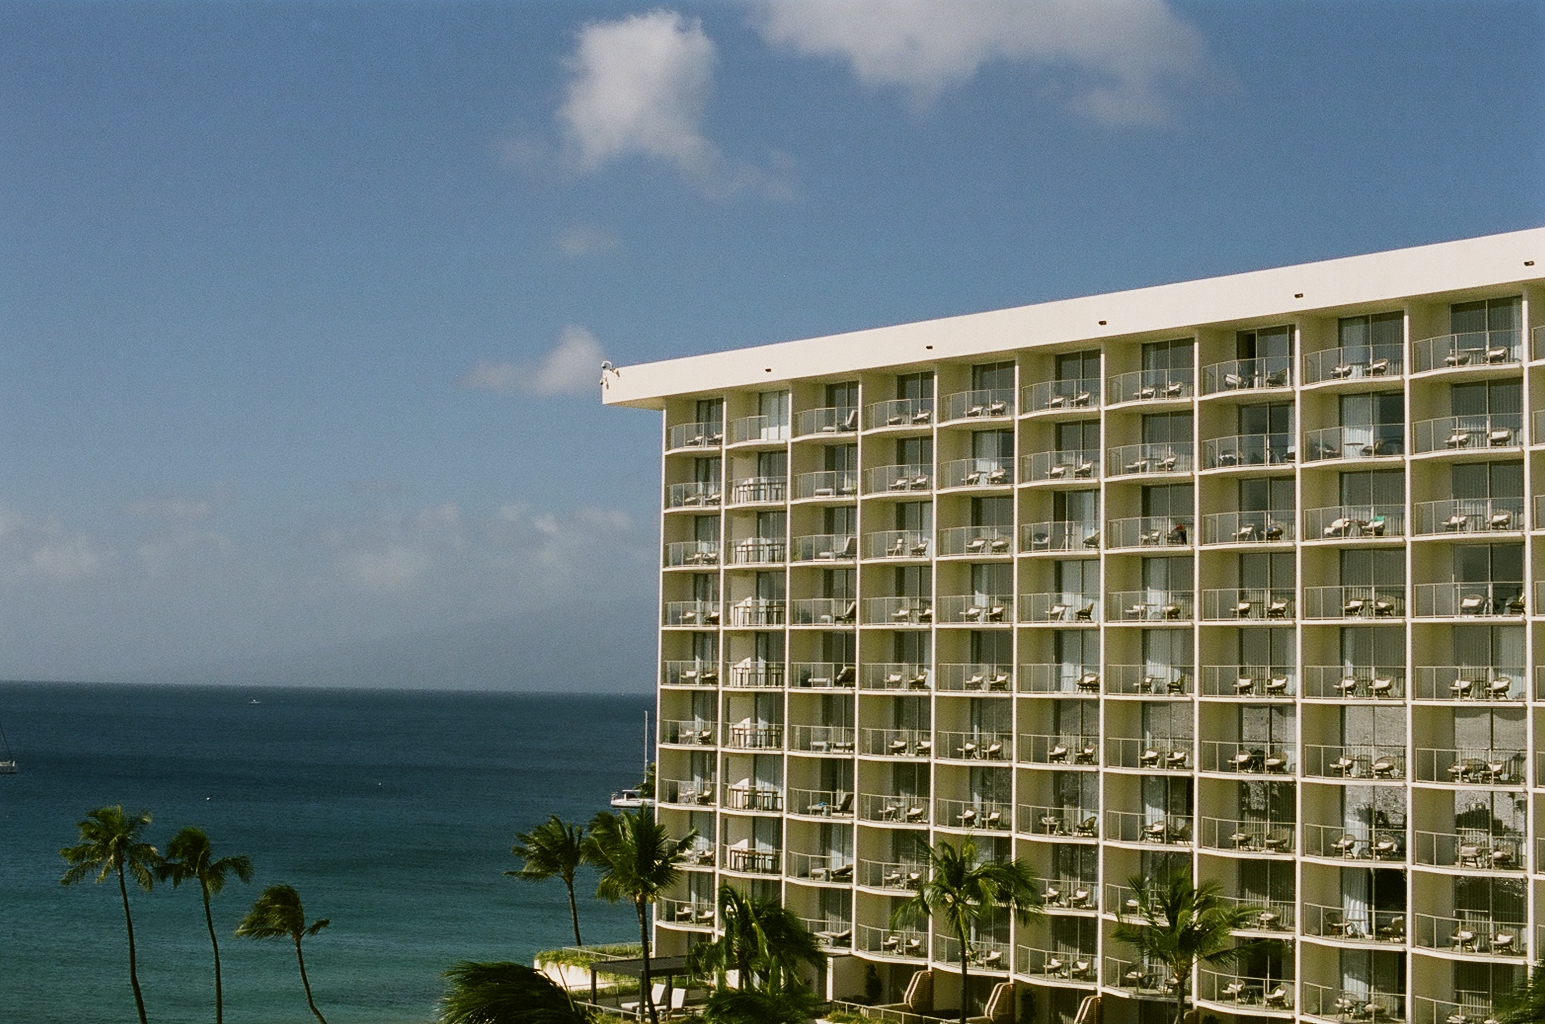 westin kaanapali with ocean in background